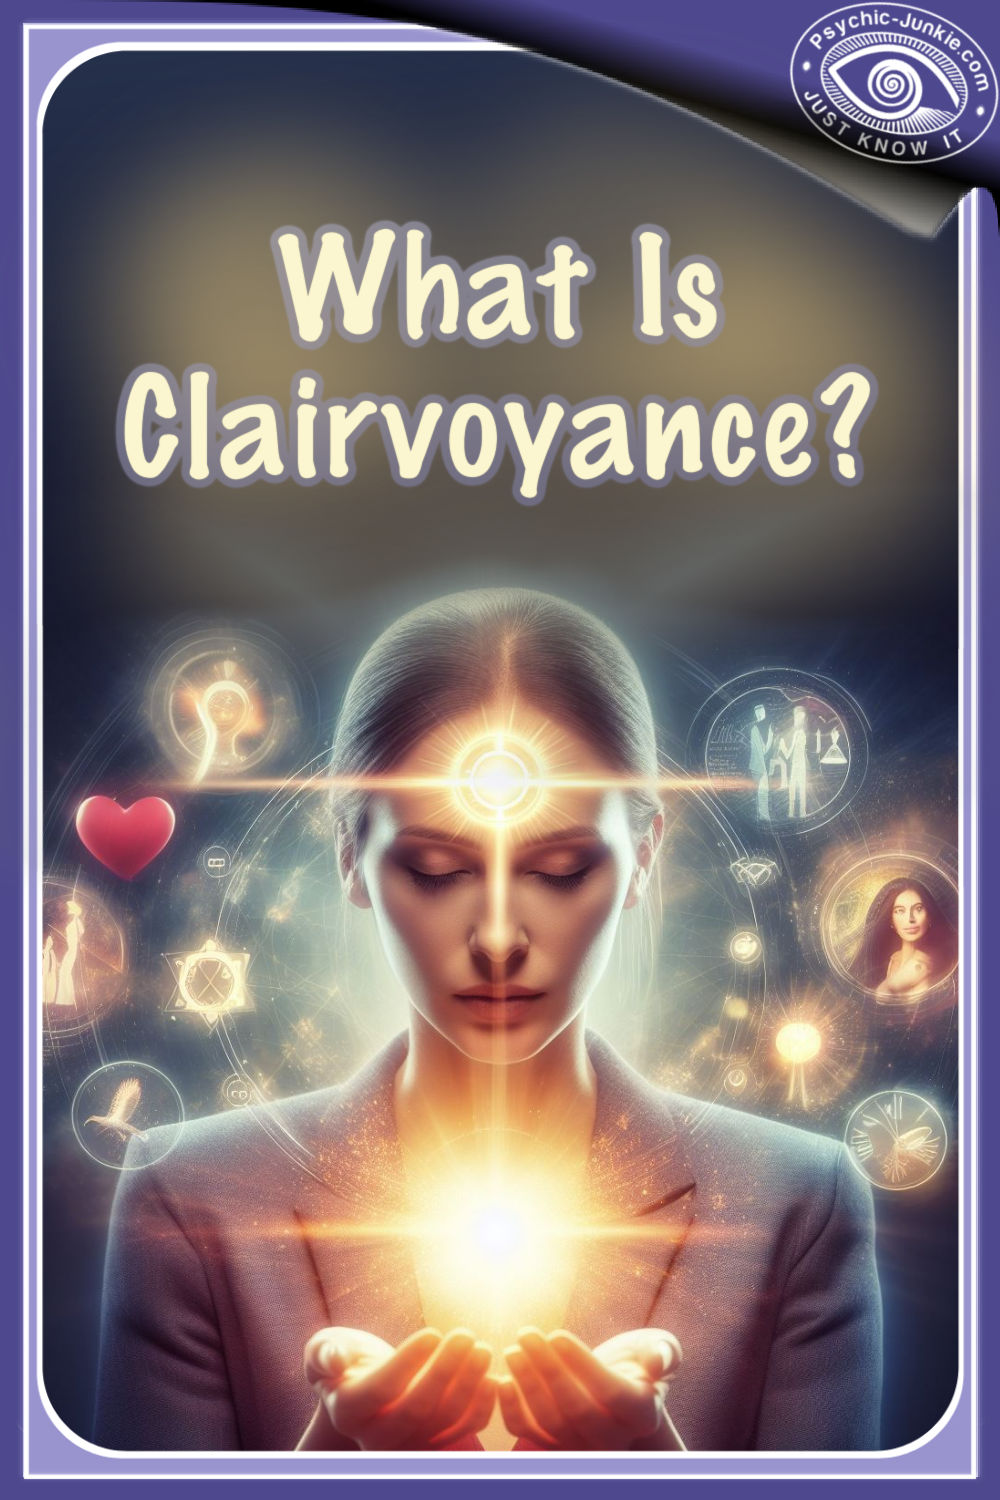 What Is Clairvoyance?